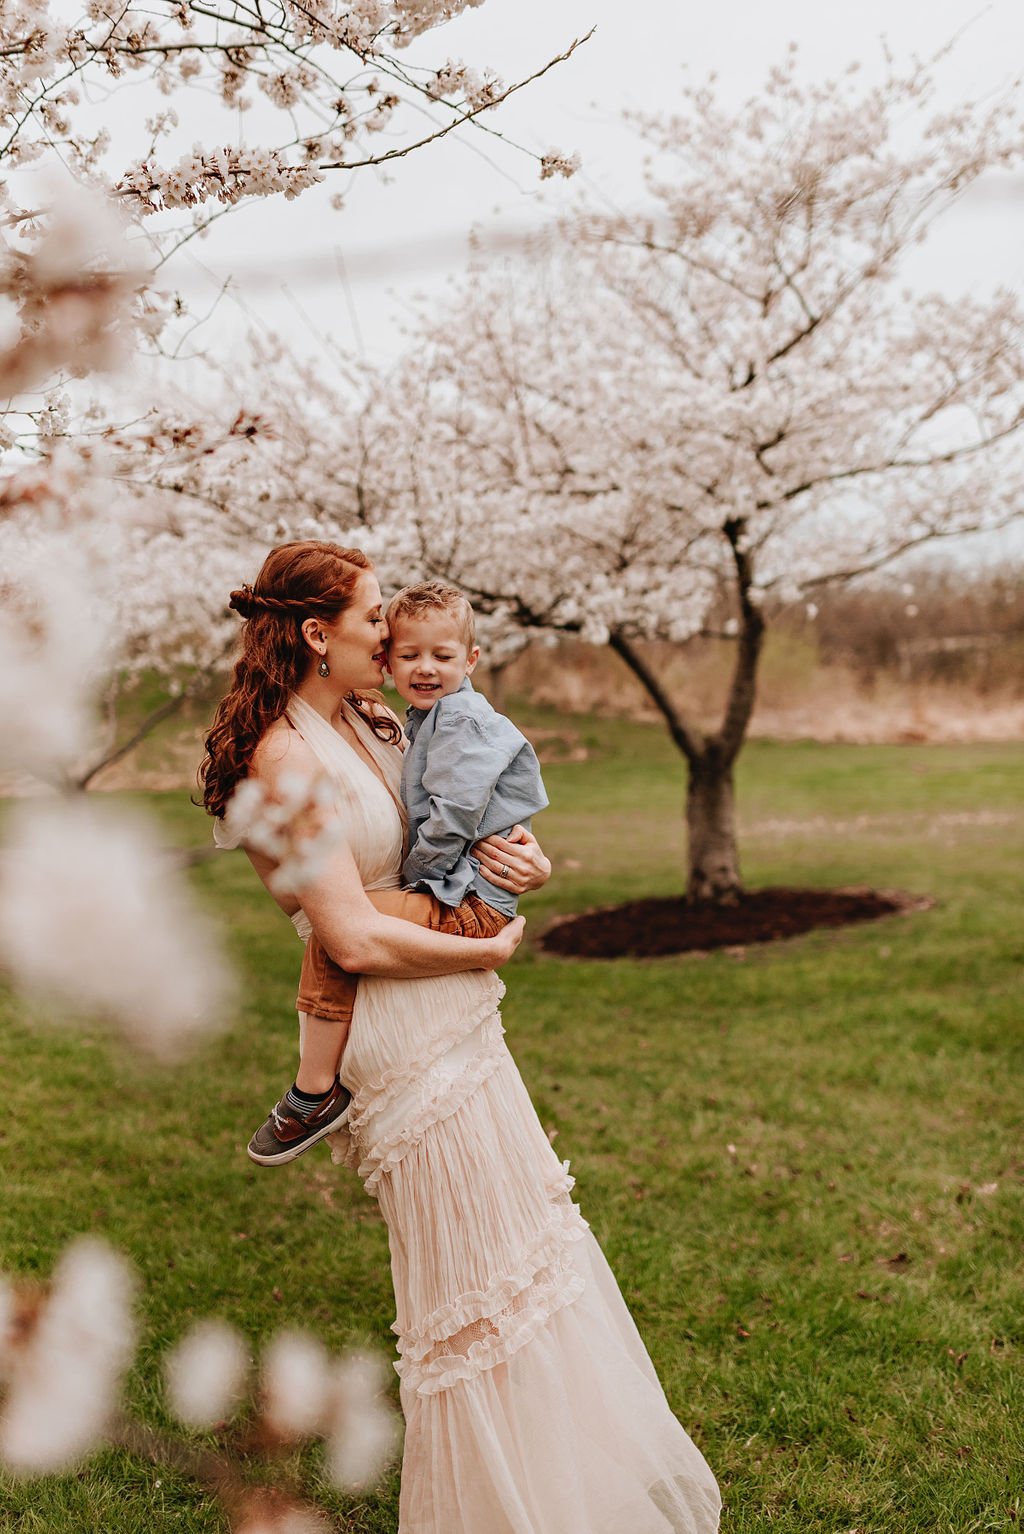 cleveland-ohio-family-mother-daughter-son-outdoor-spring-session-flower-cherry-blossoms11.jpg